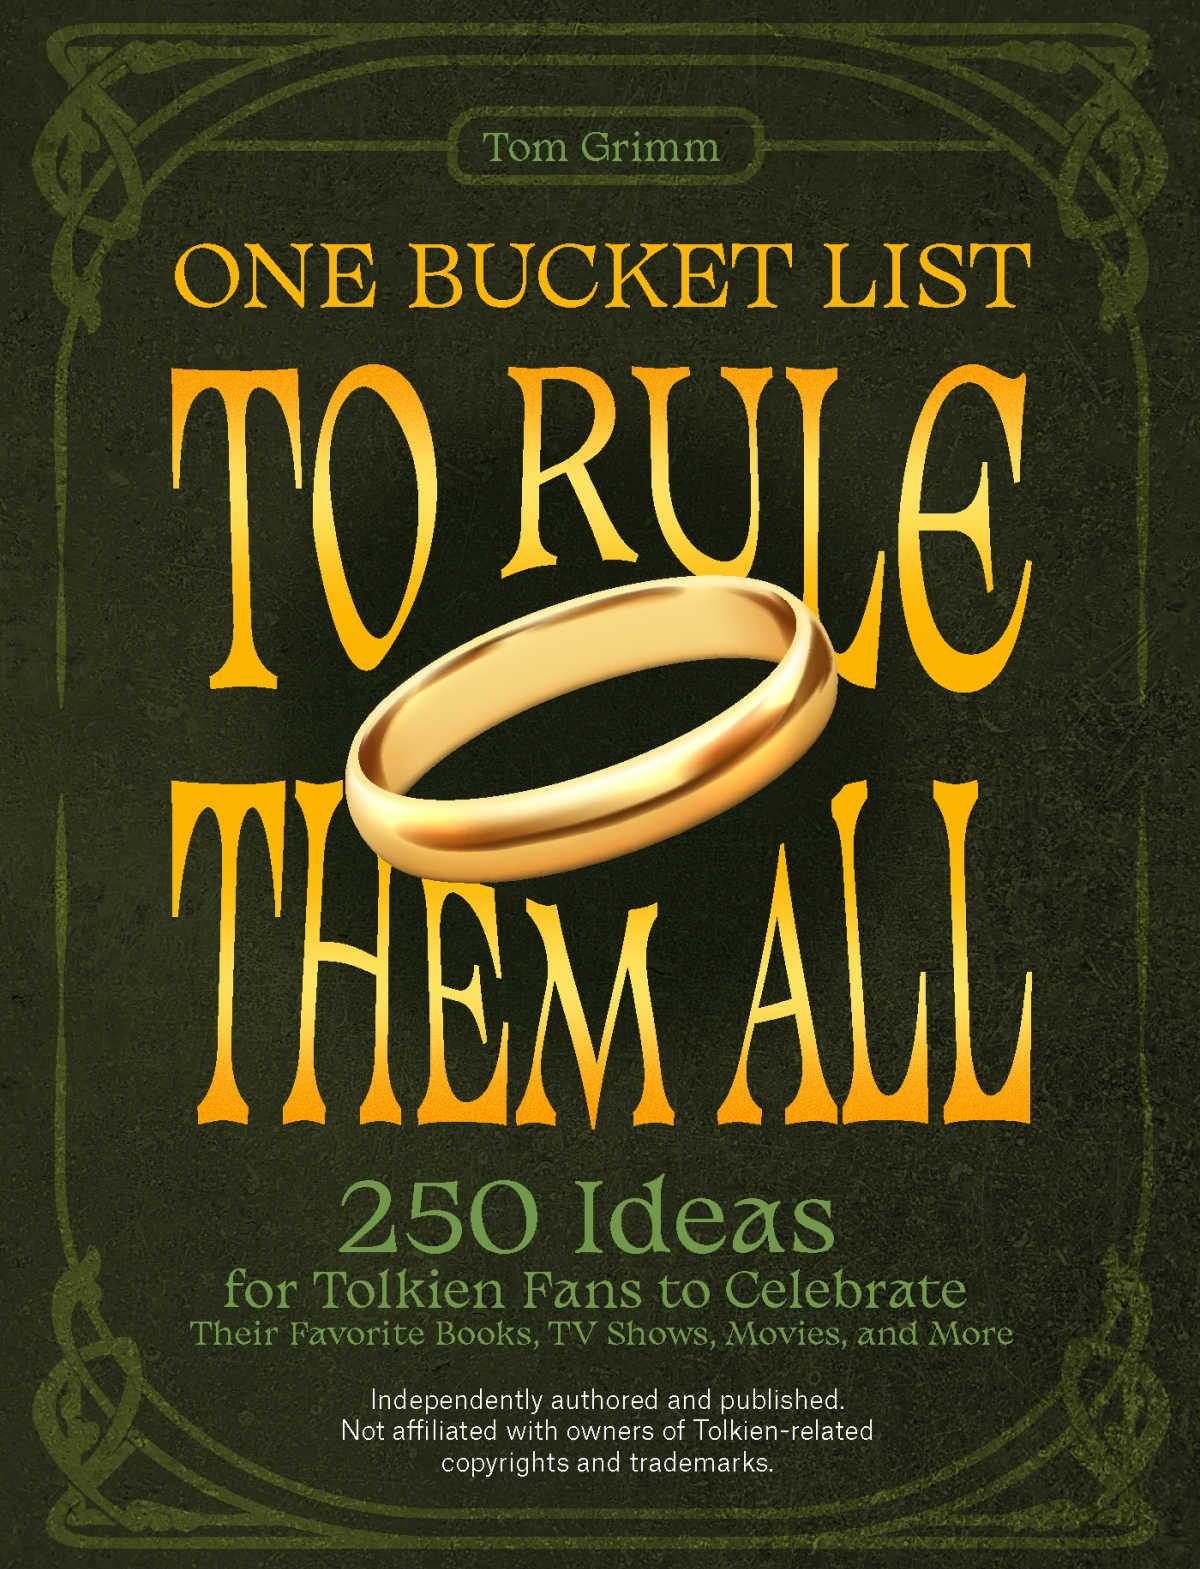 book one bucket list to rule them all